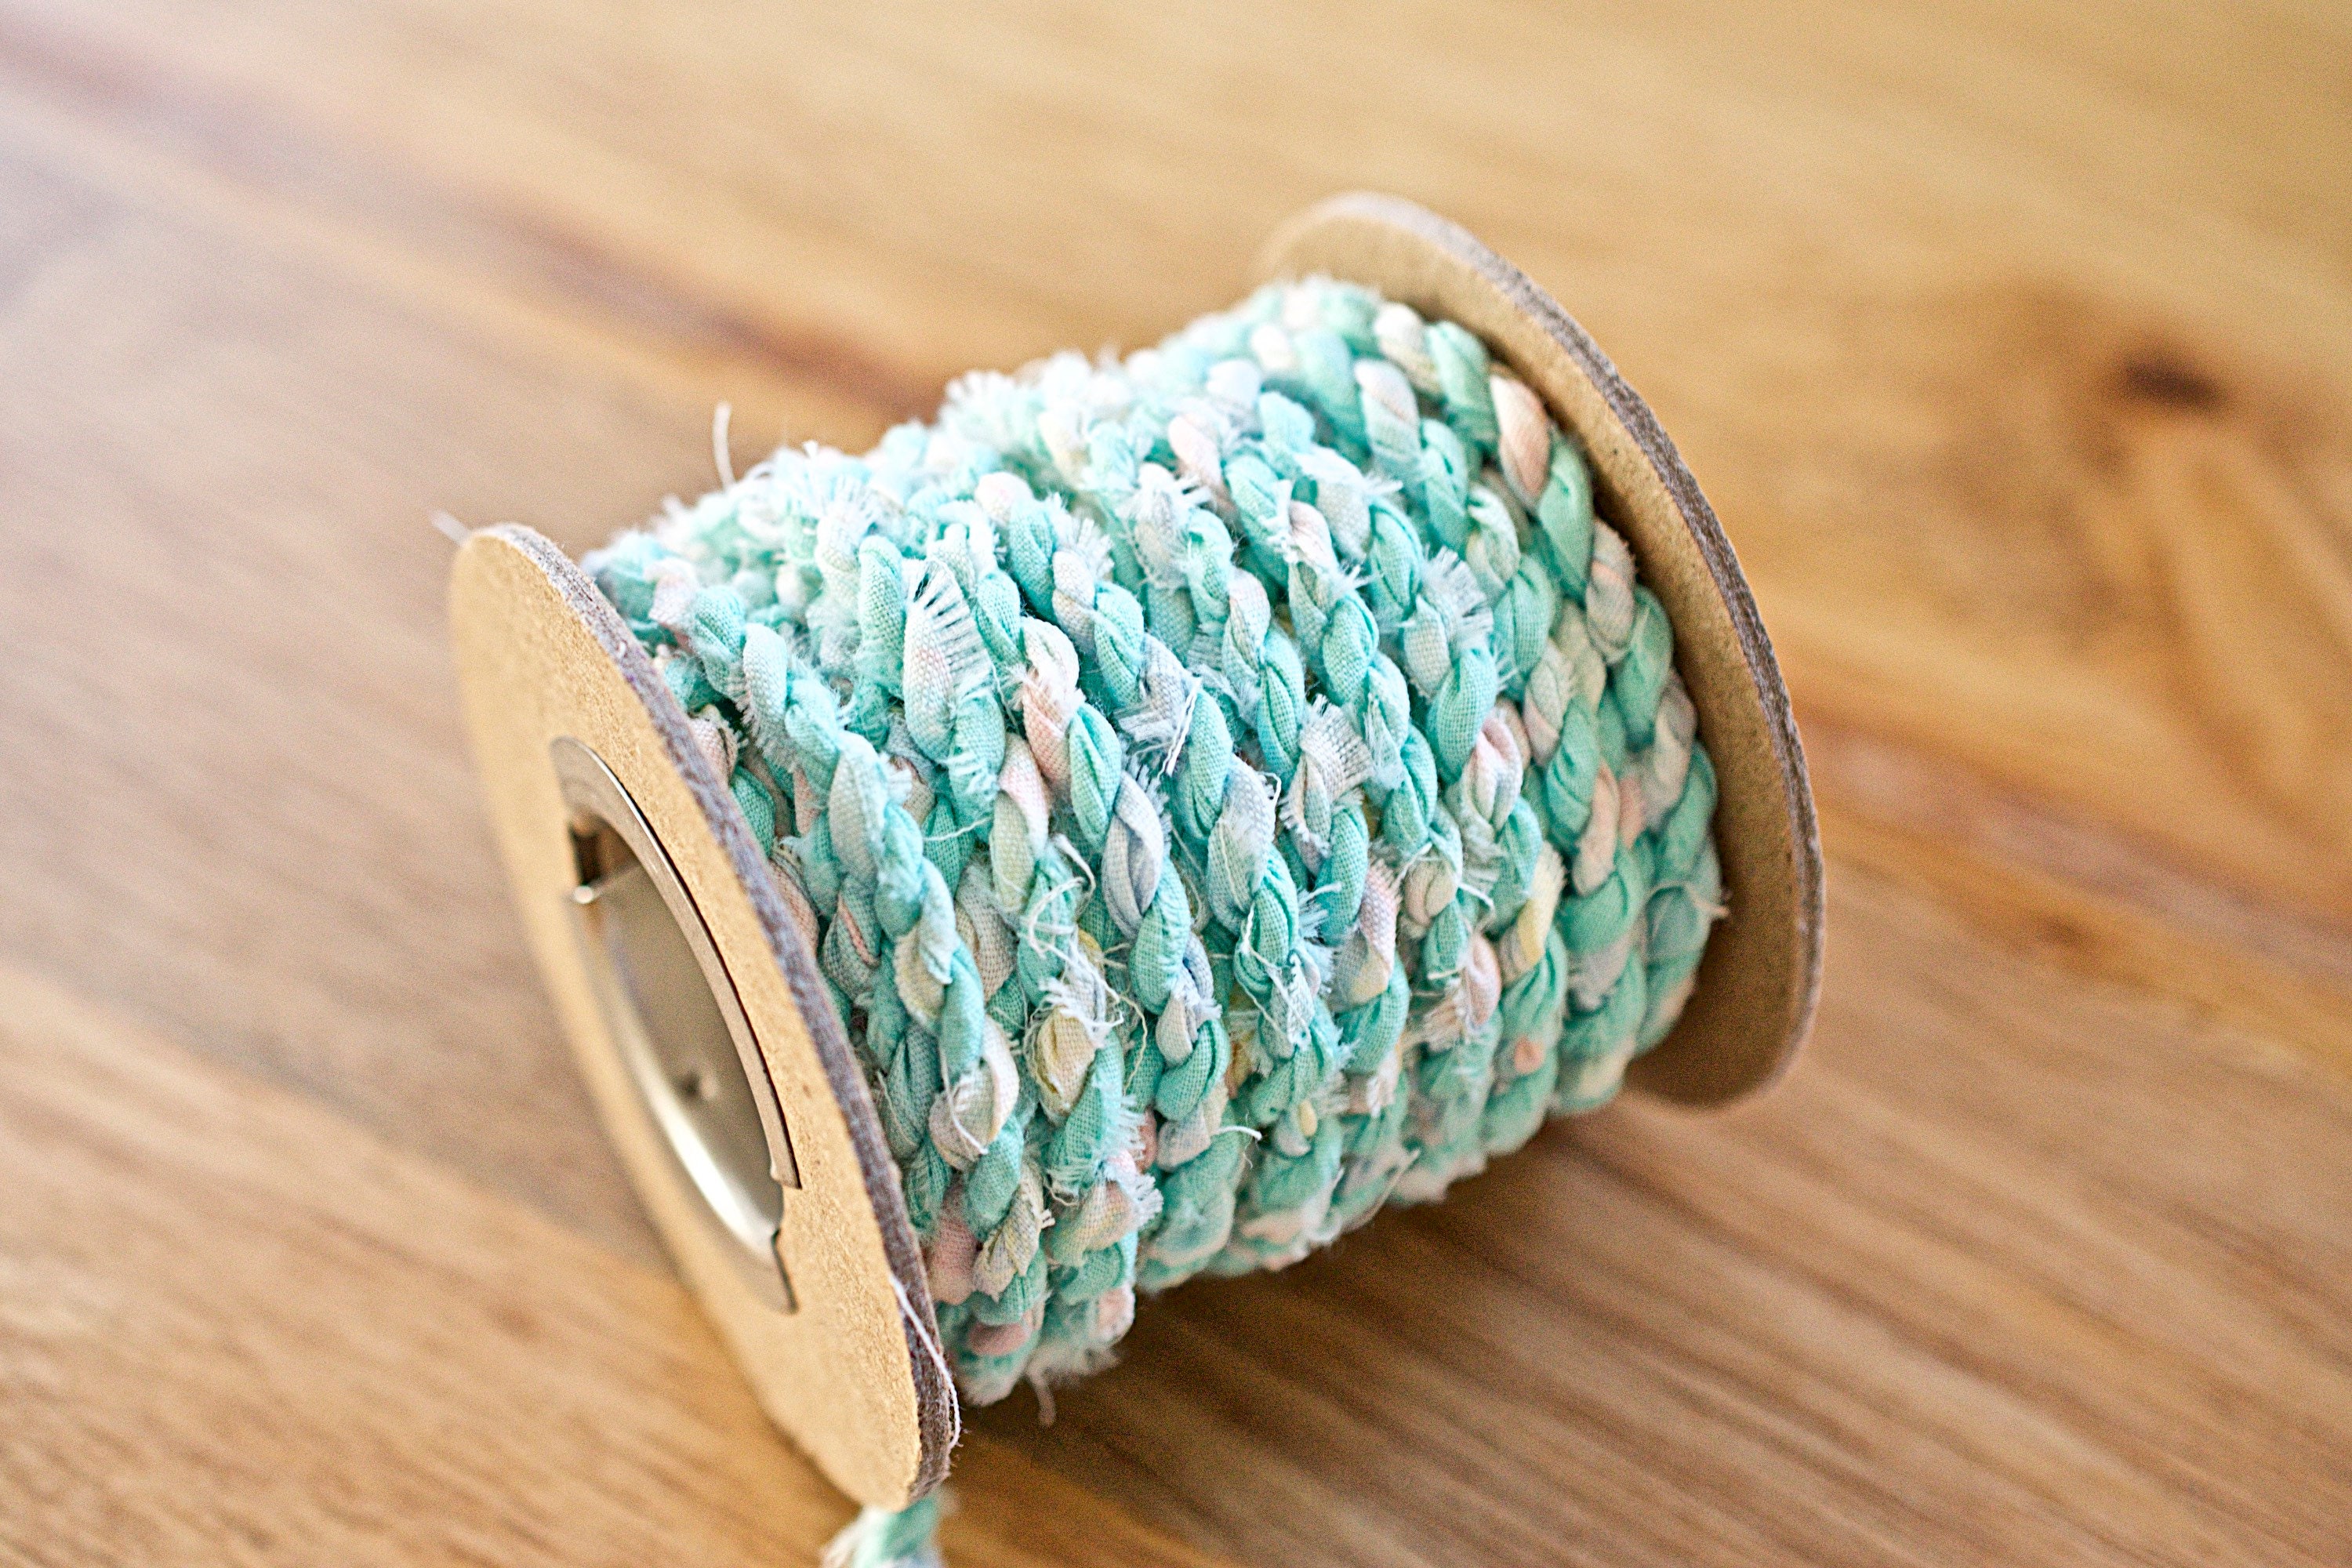 Teal Green Bakery Twine (1 Roll) Teal Green Twine, Teal Green Deli Twine,  Teal Green Gift Wrapping Twine, Teal Green Crafters Twine, Twine